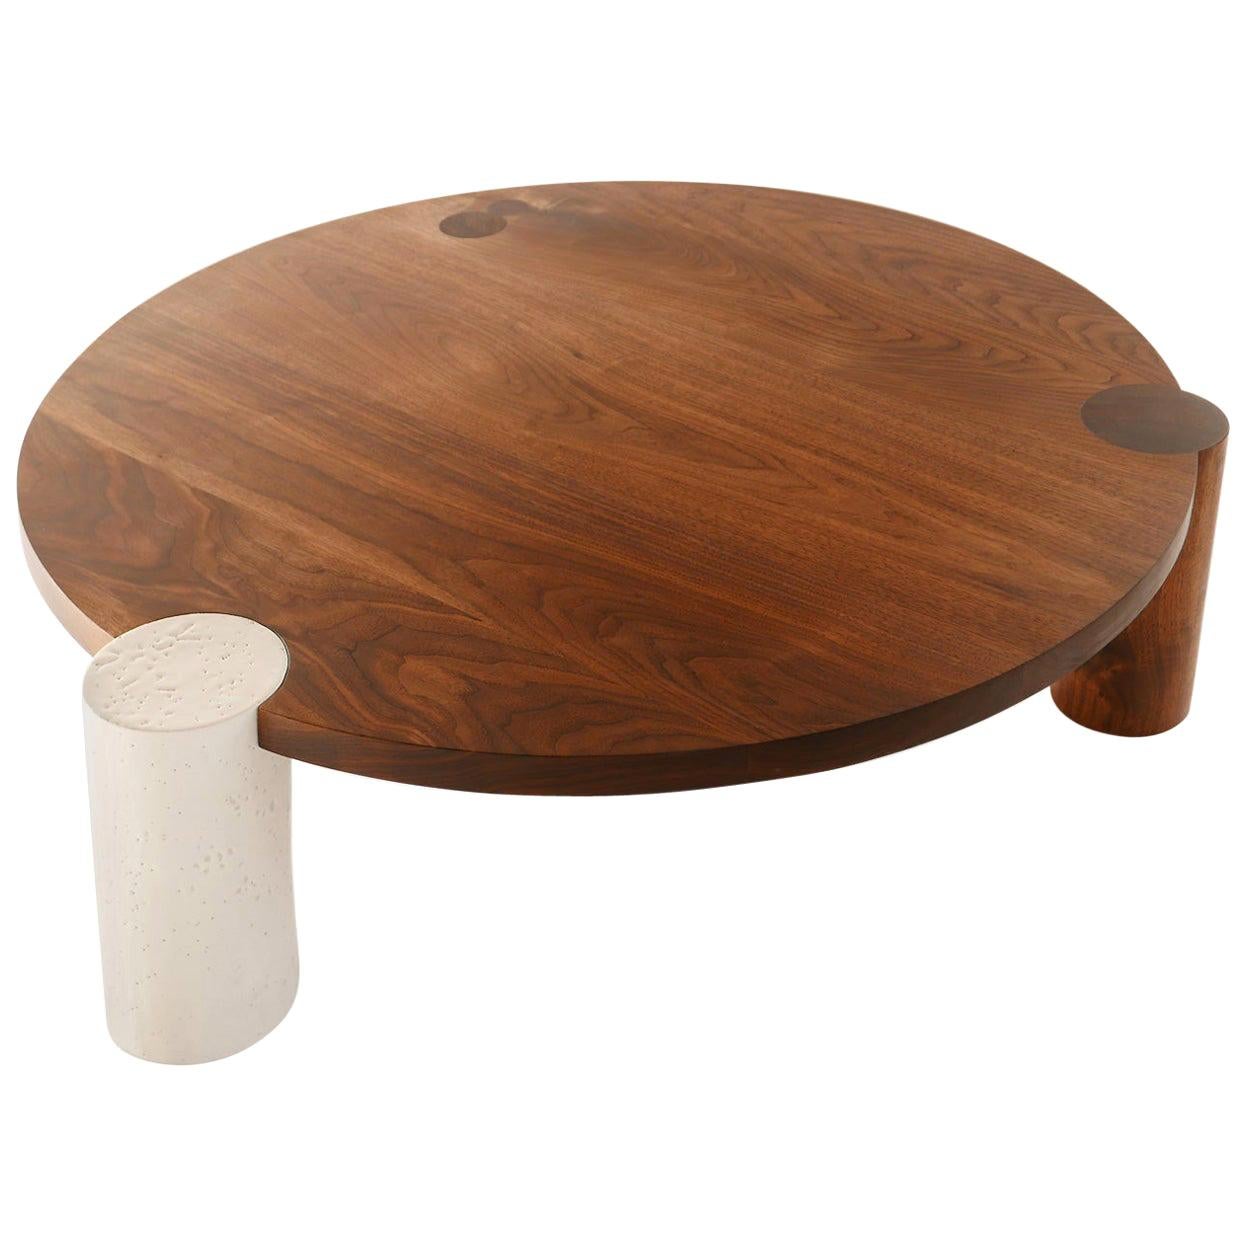 Black Walnut 48" Coffee Table with Ceramic Feature Leg by Hinterland Design